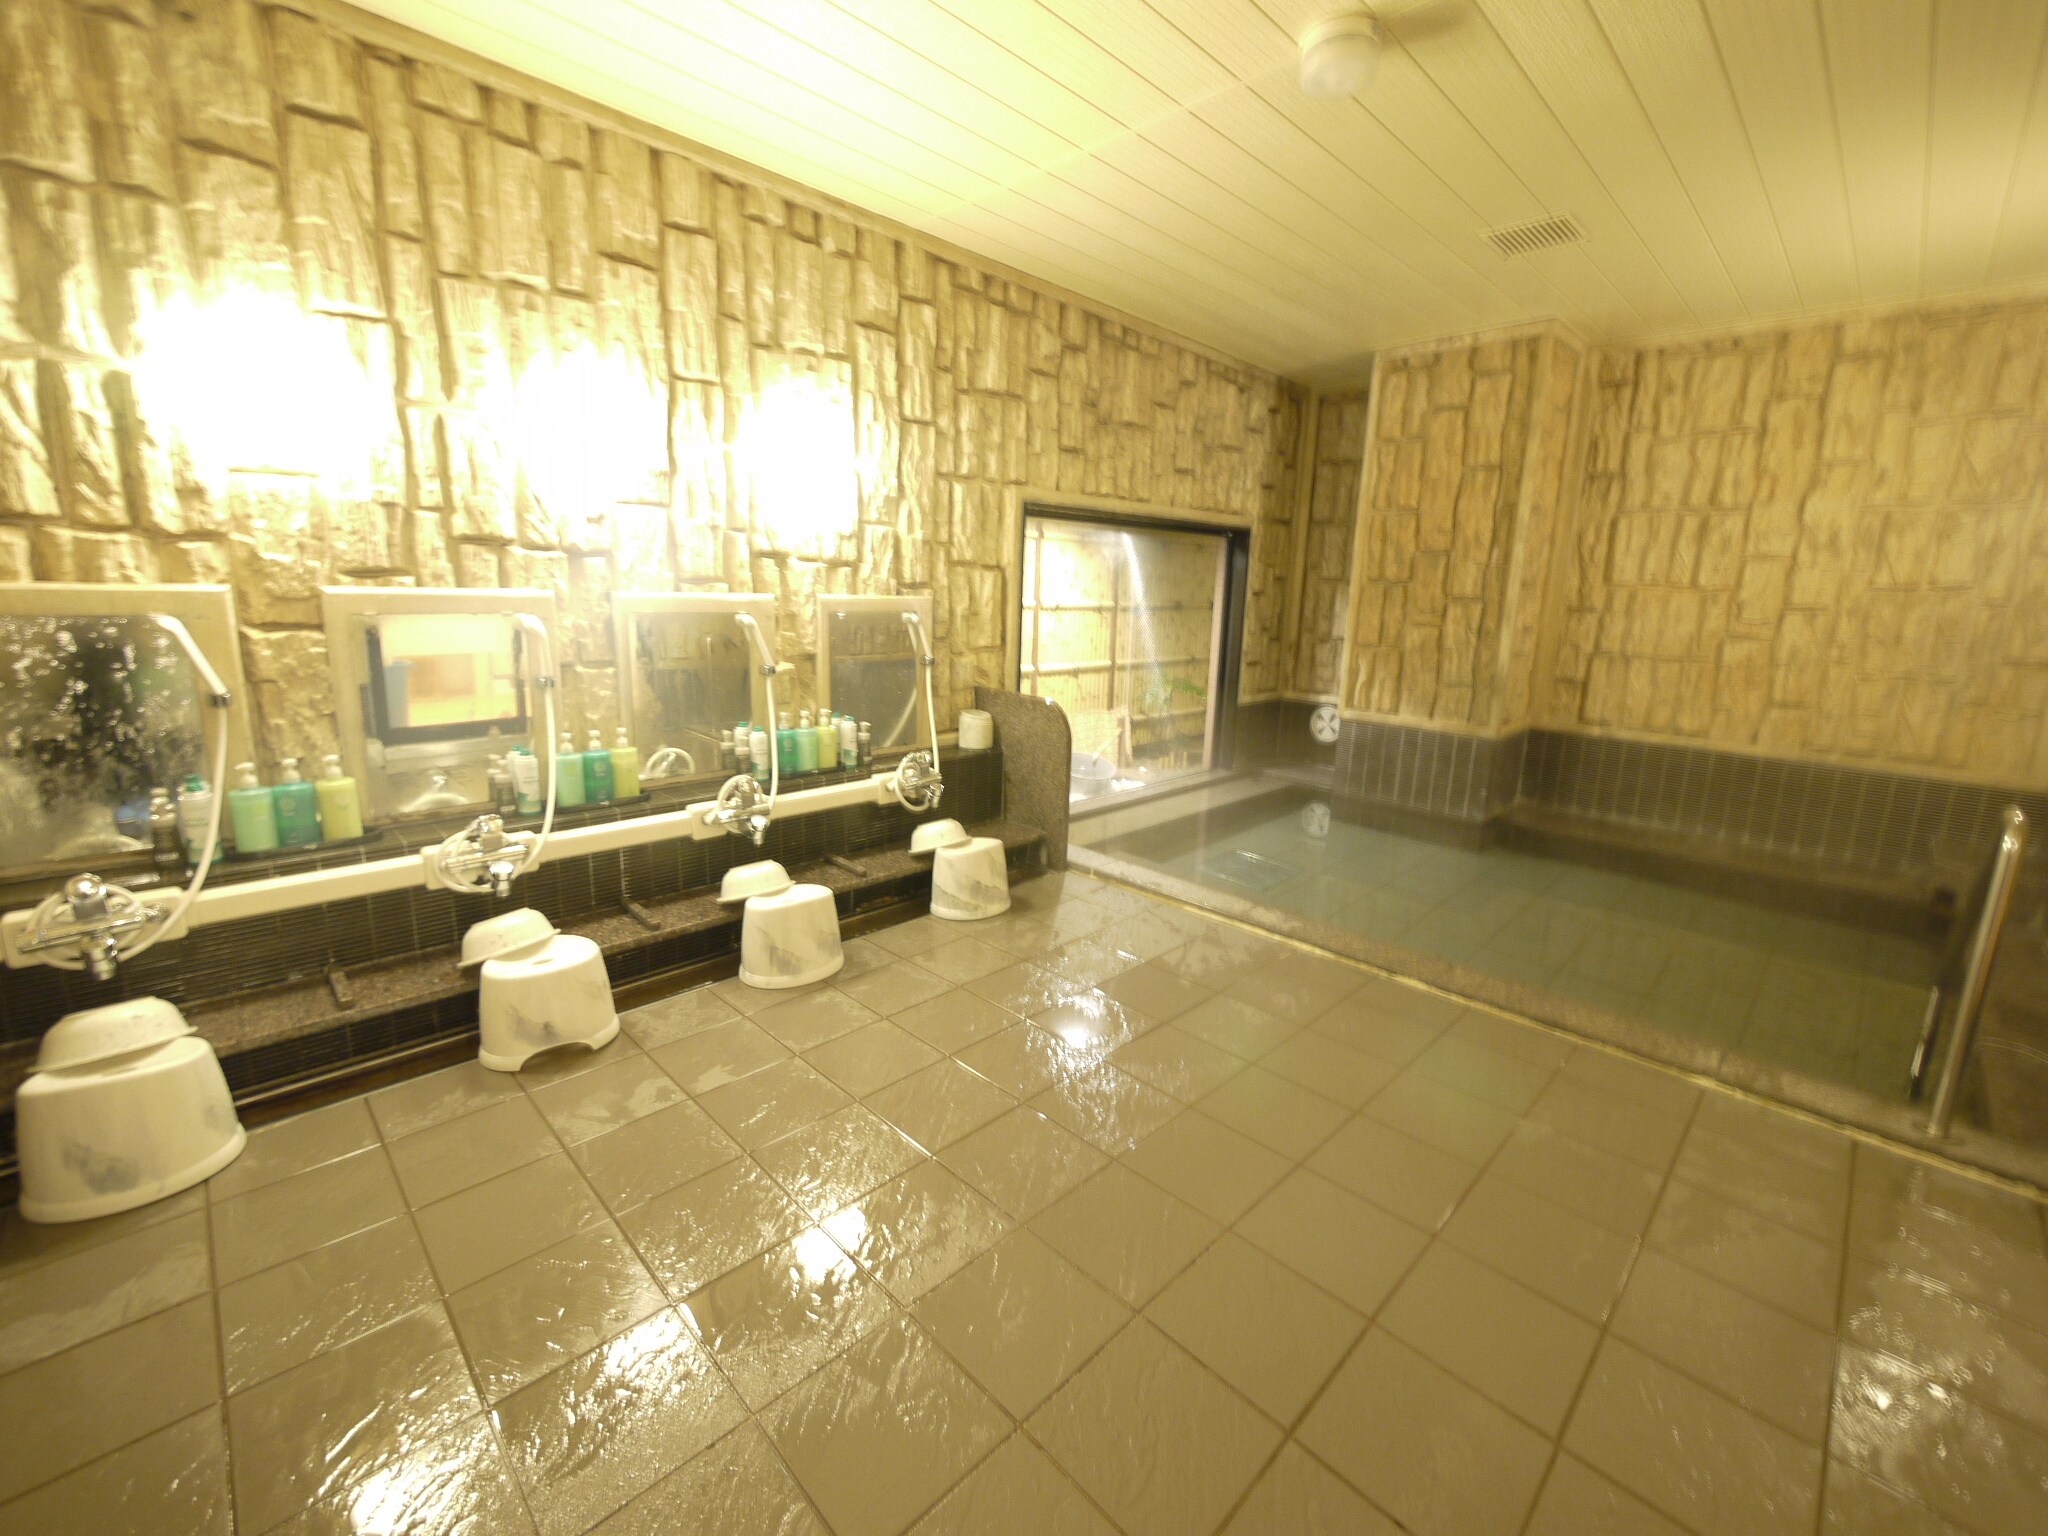 [Men's public bath] Traveler's hot water is available from 15:00 to 2:00 and from 5:00 to 10:00.